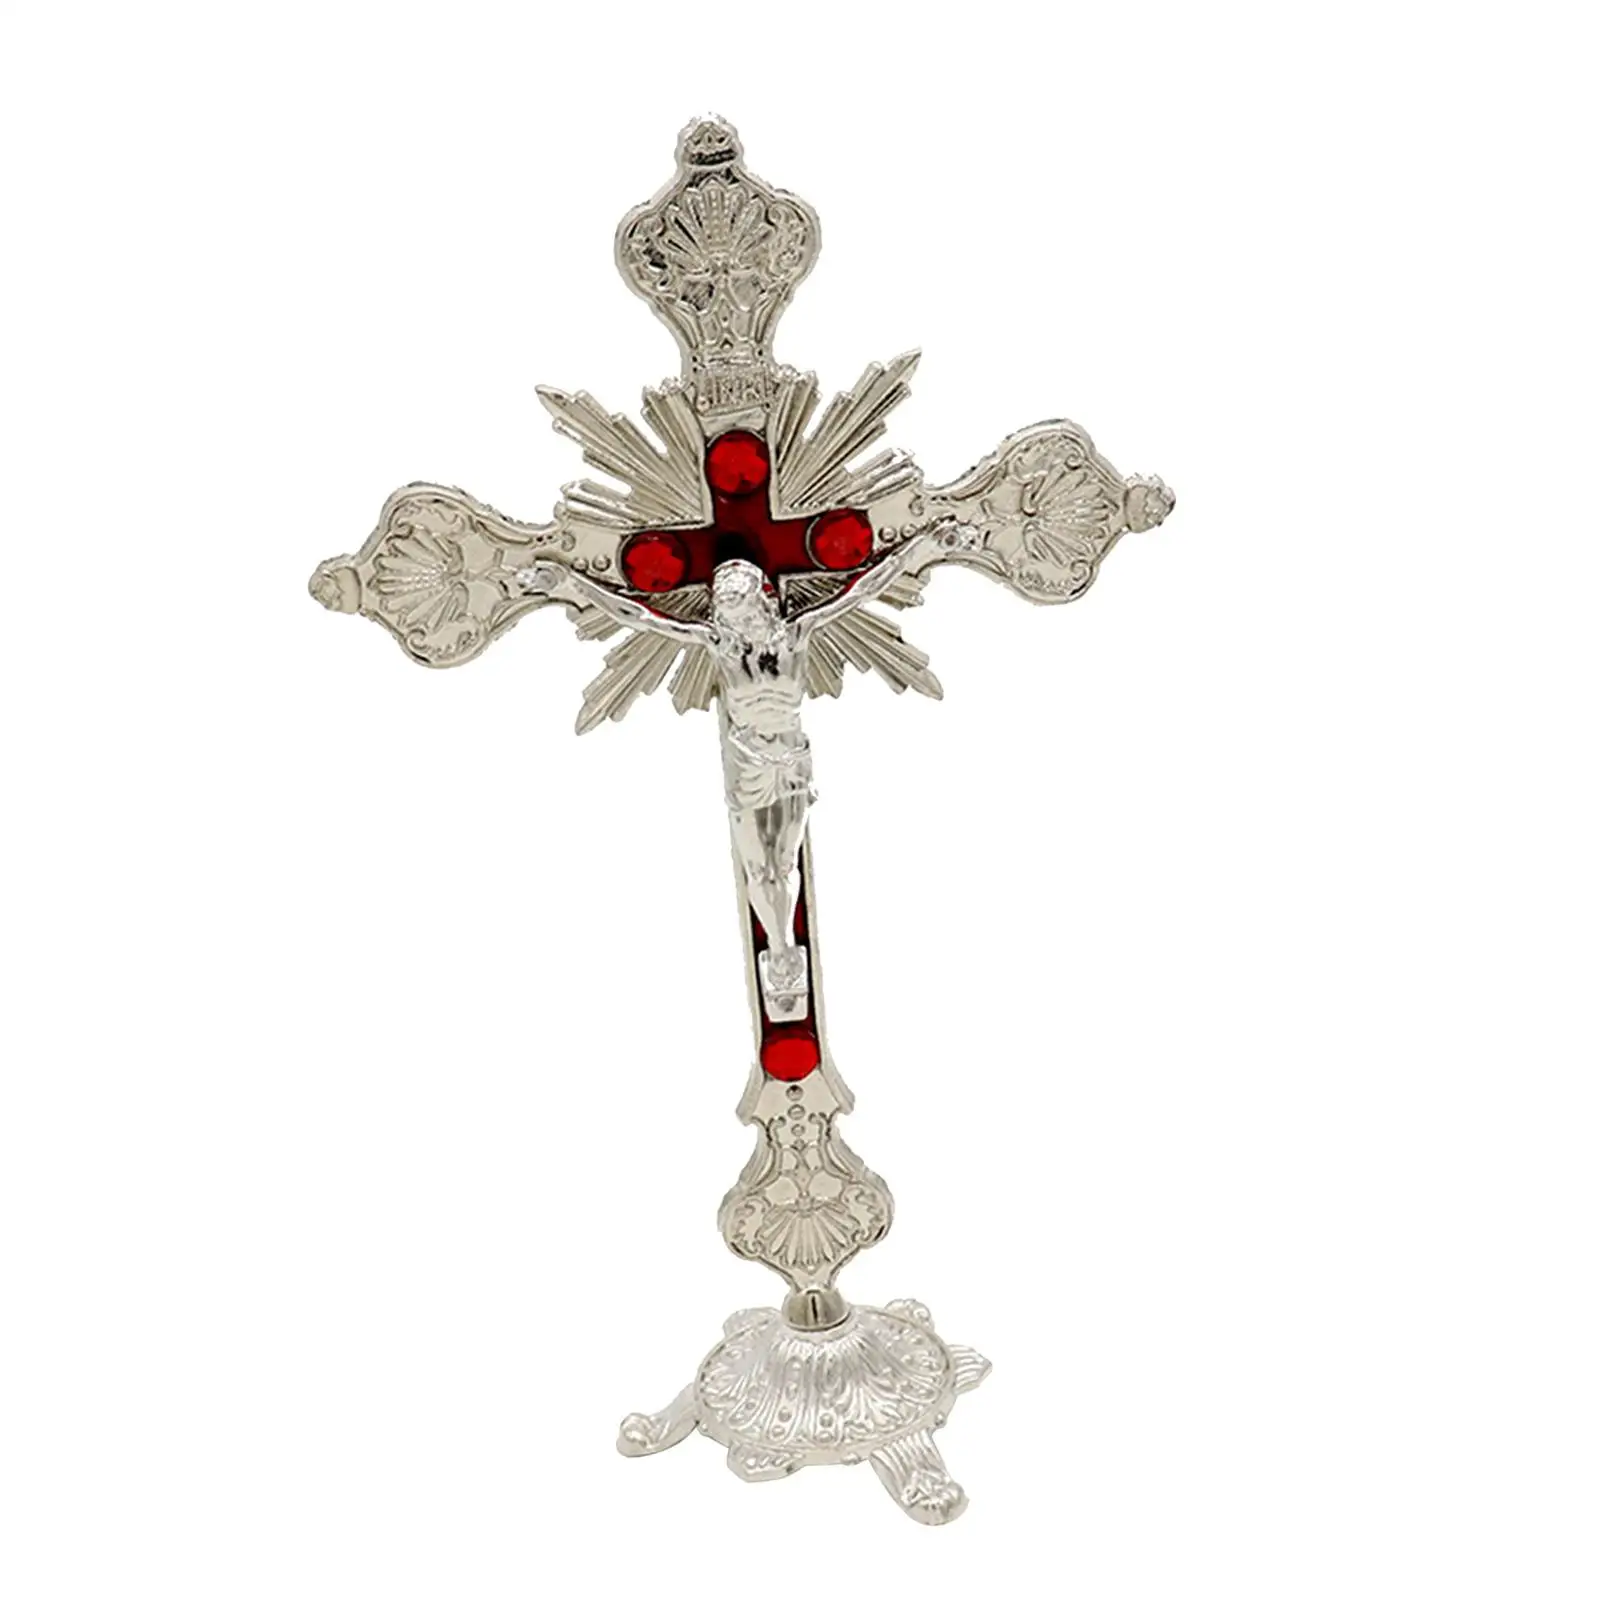 Metal Crucifix Table Cross Catholic Table Cross With Prayer Stand Home